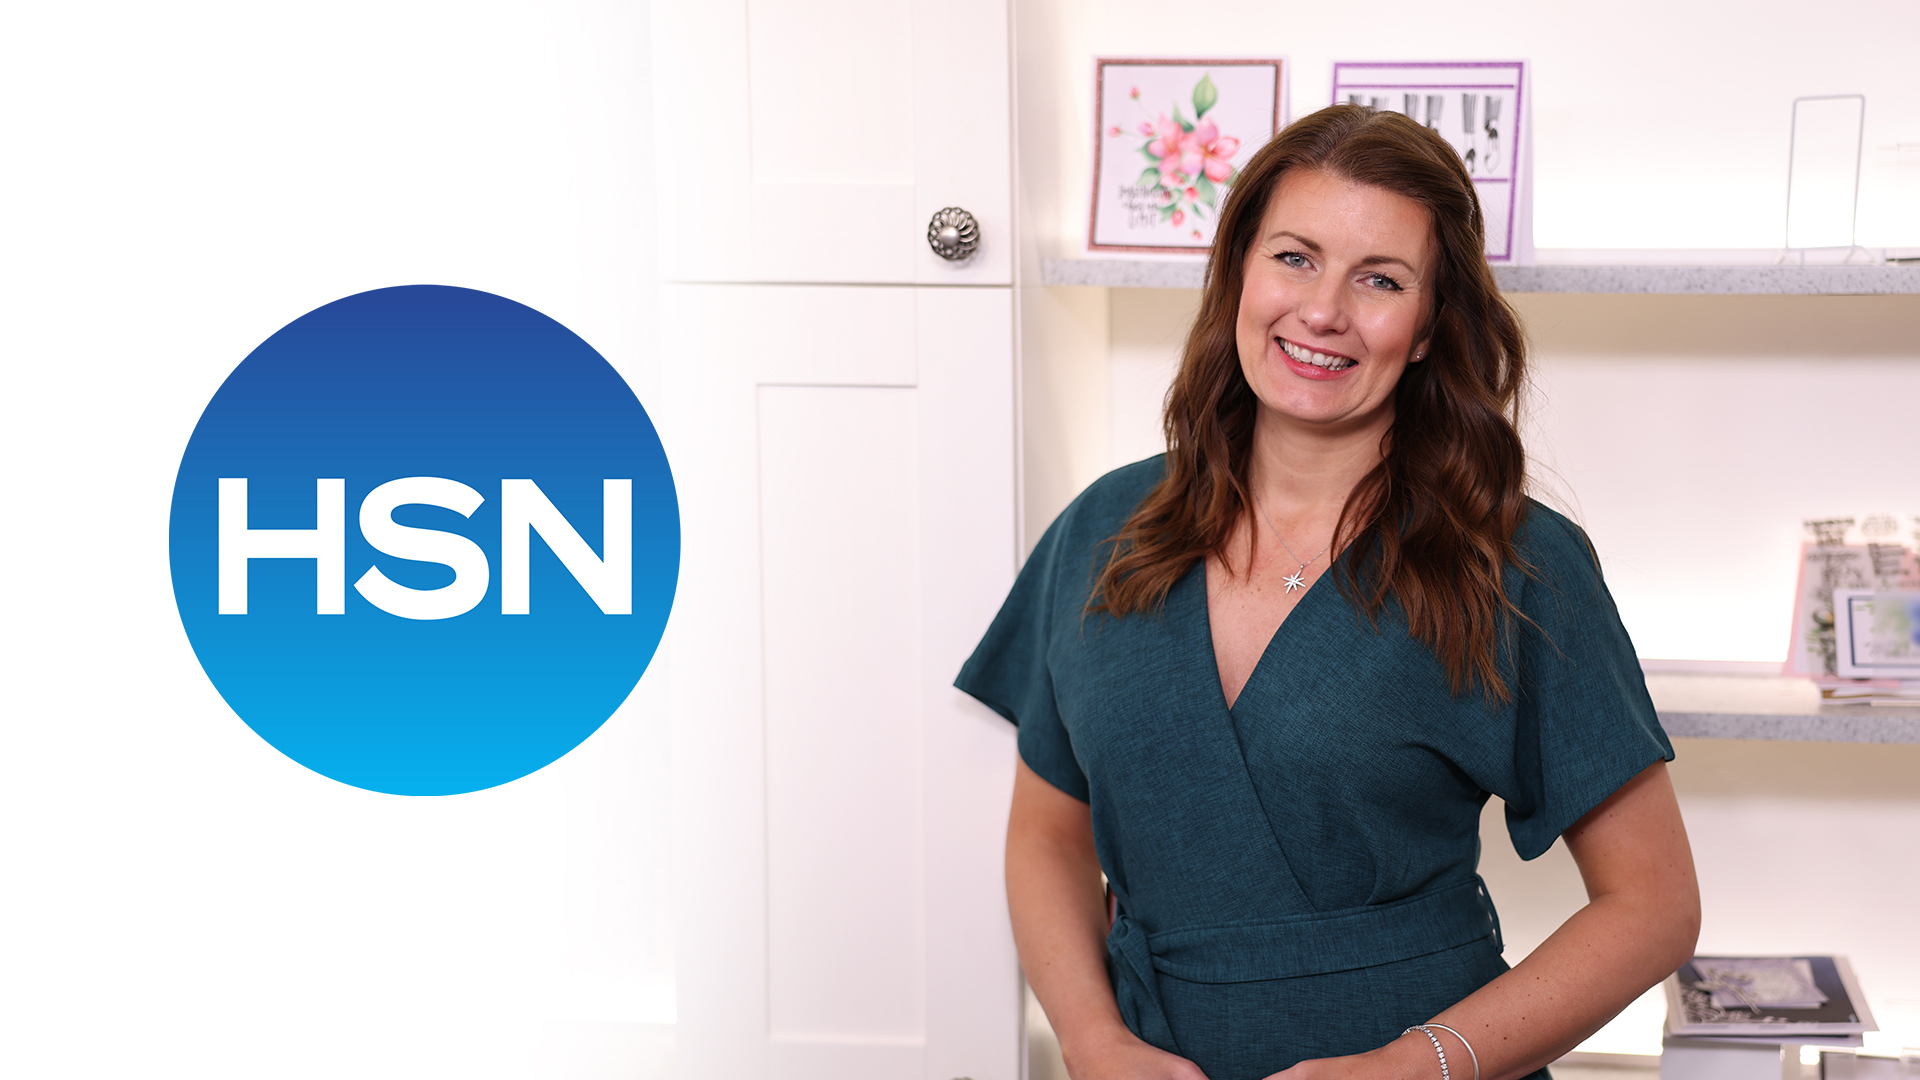 hsn-show-may-3rd---toni-is-joined-by-suzanne-runyan-for-the-latest-stamps-by-me-product-launch